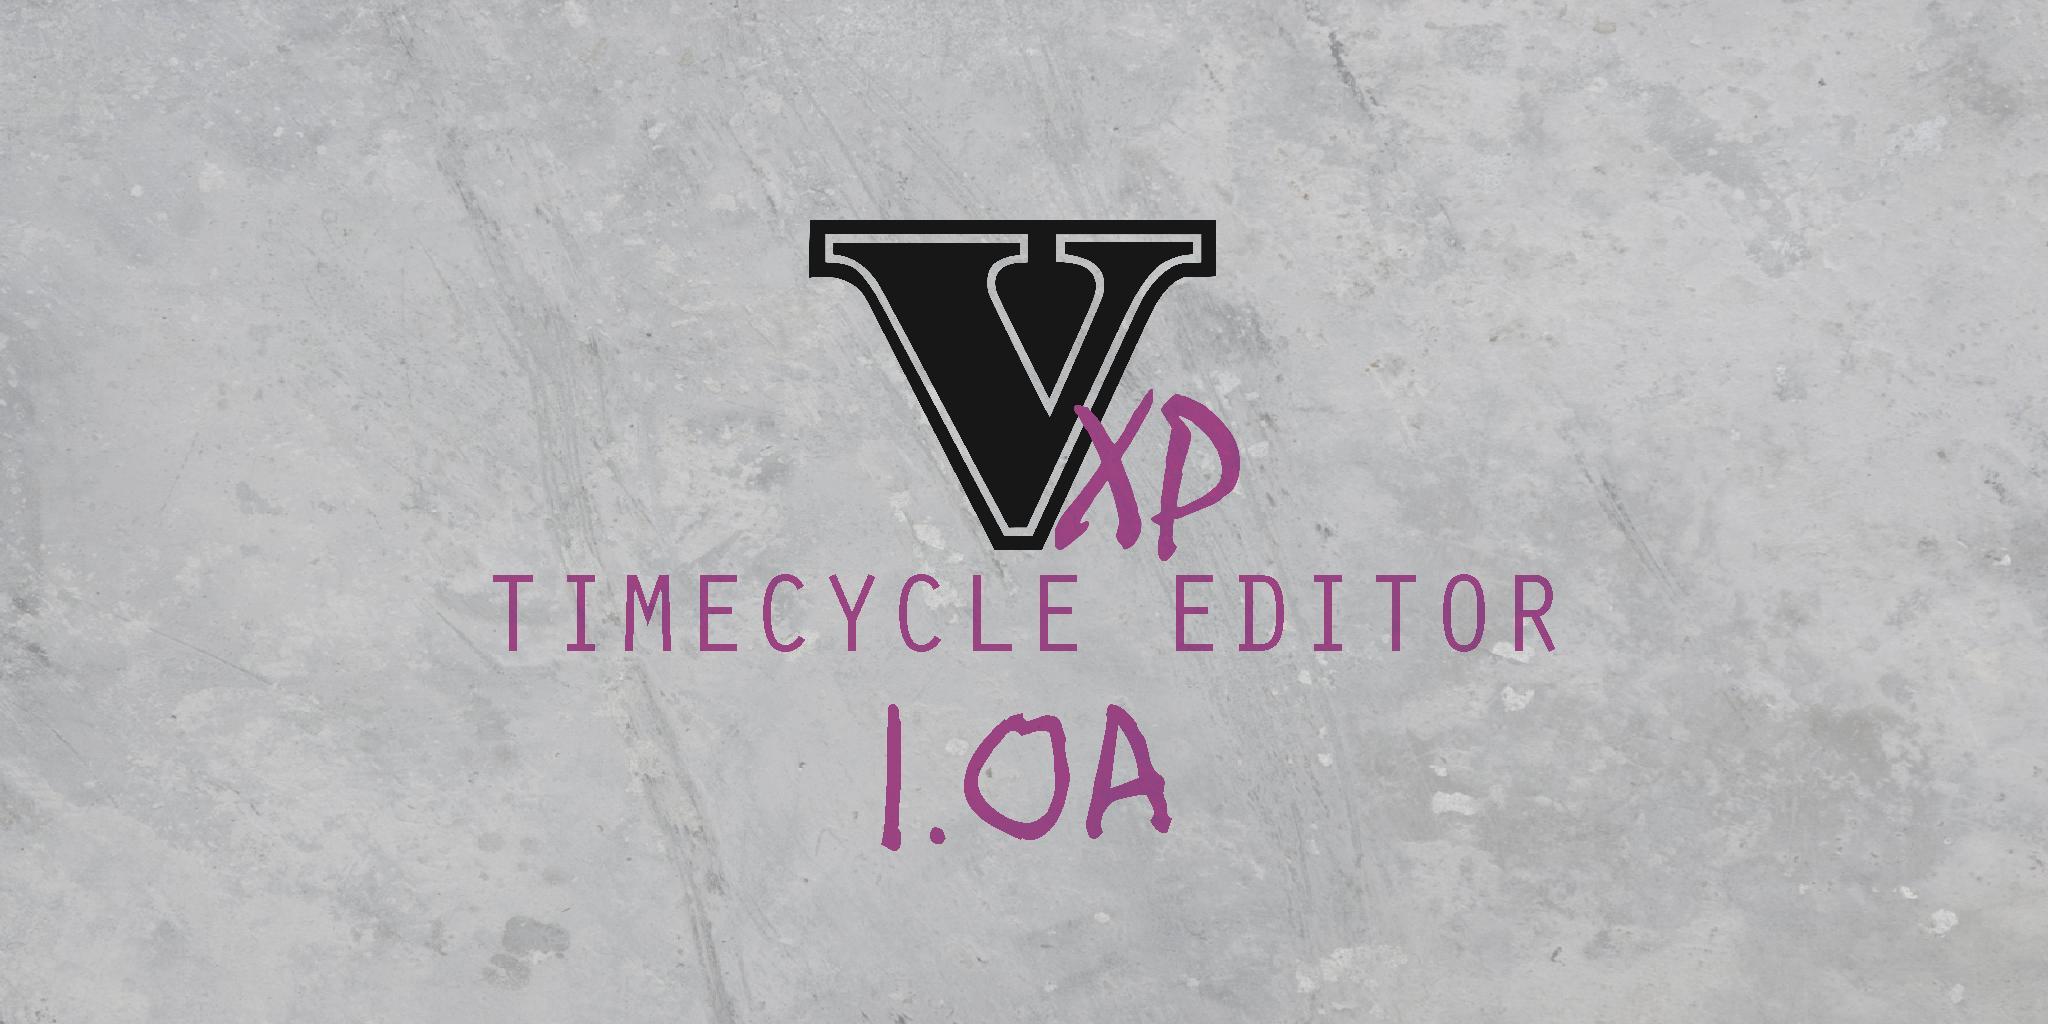 [VXP] Timecycle Editor